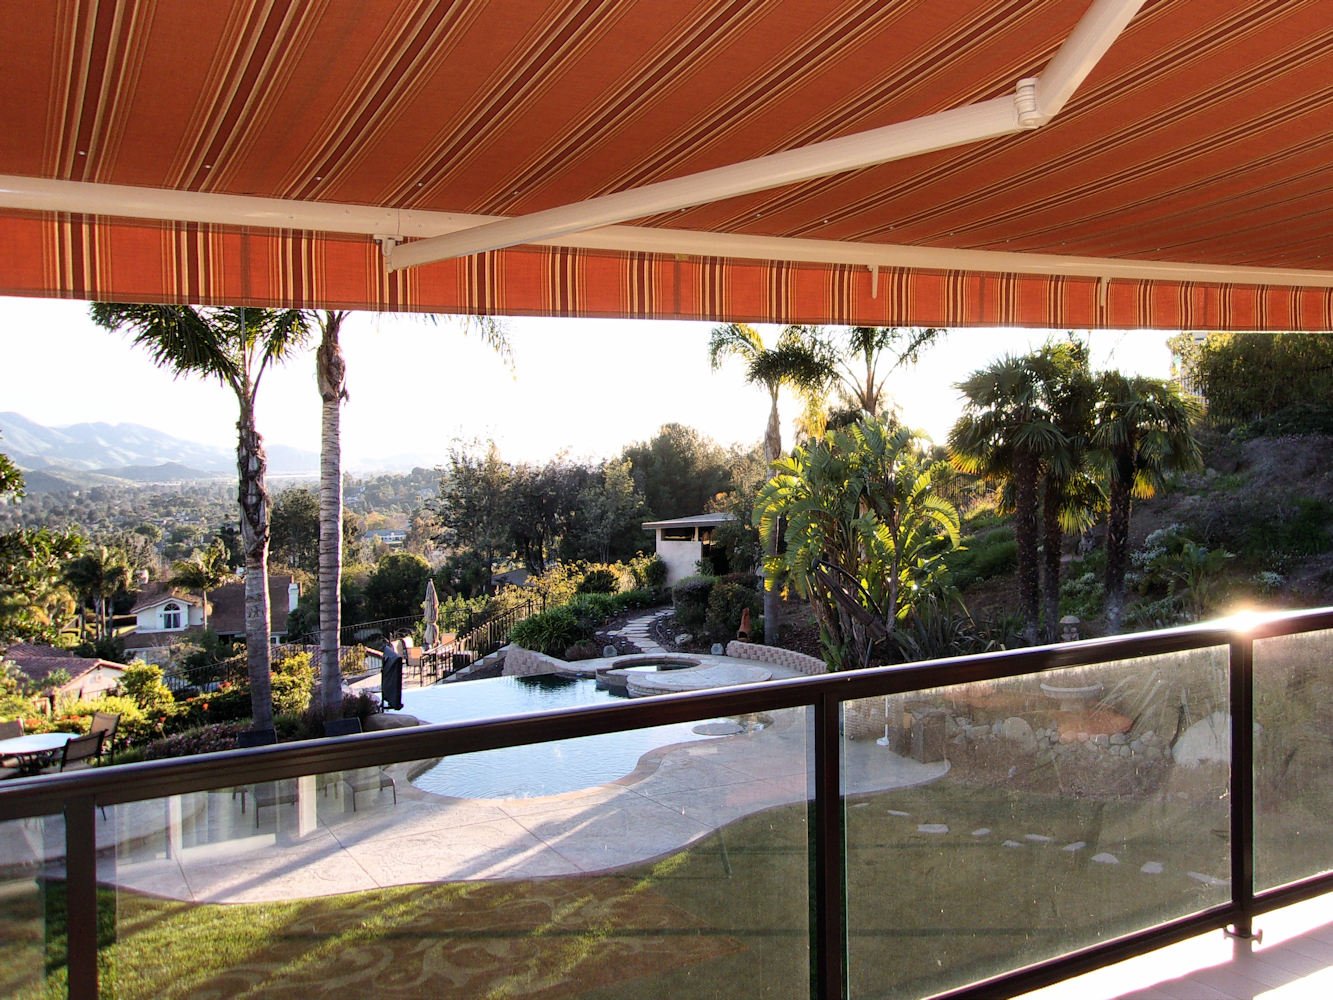 How Much Do Awnings Cost to Install?